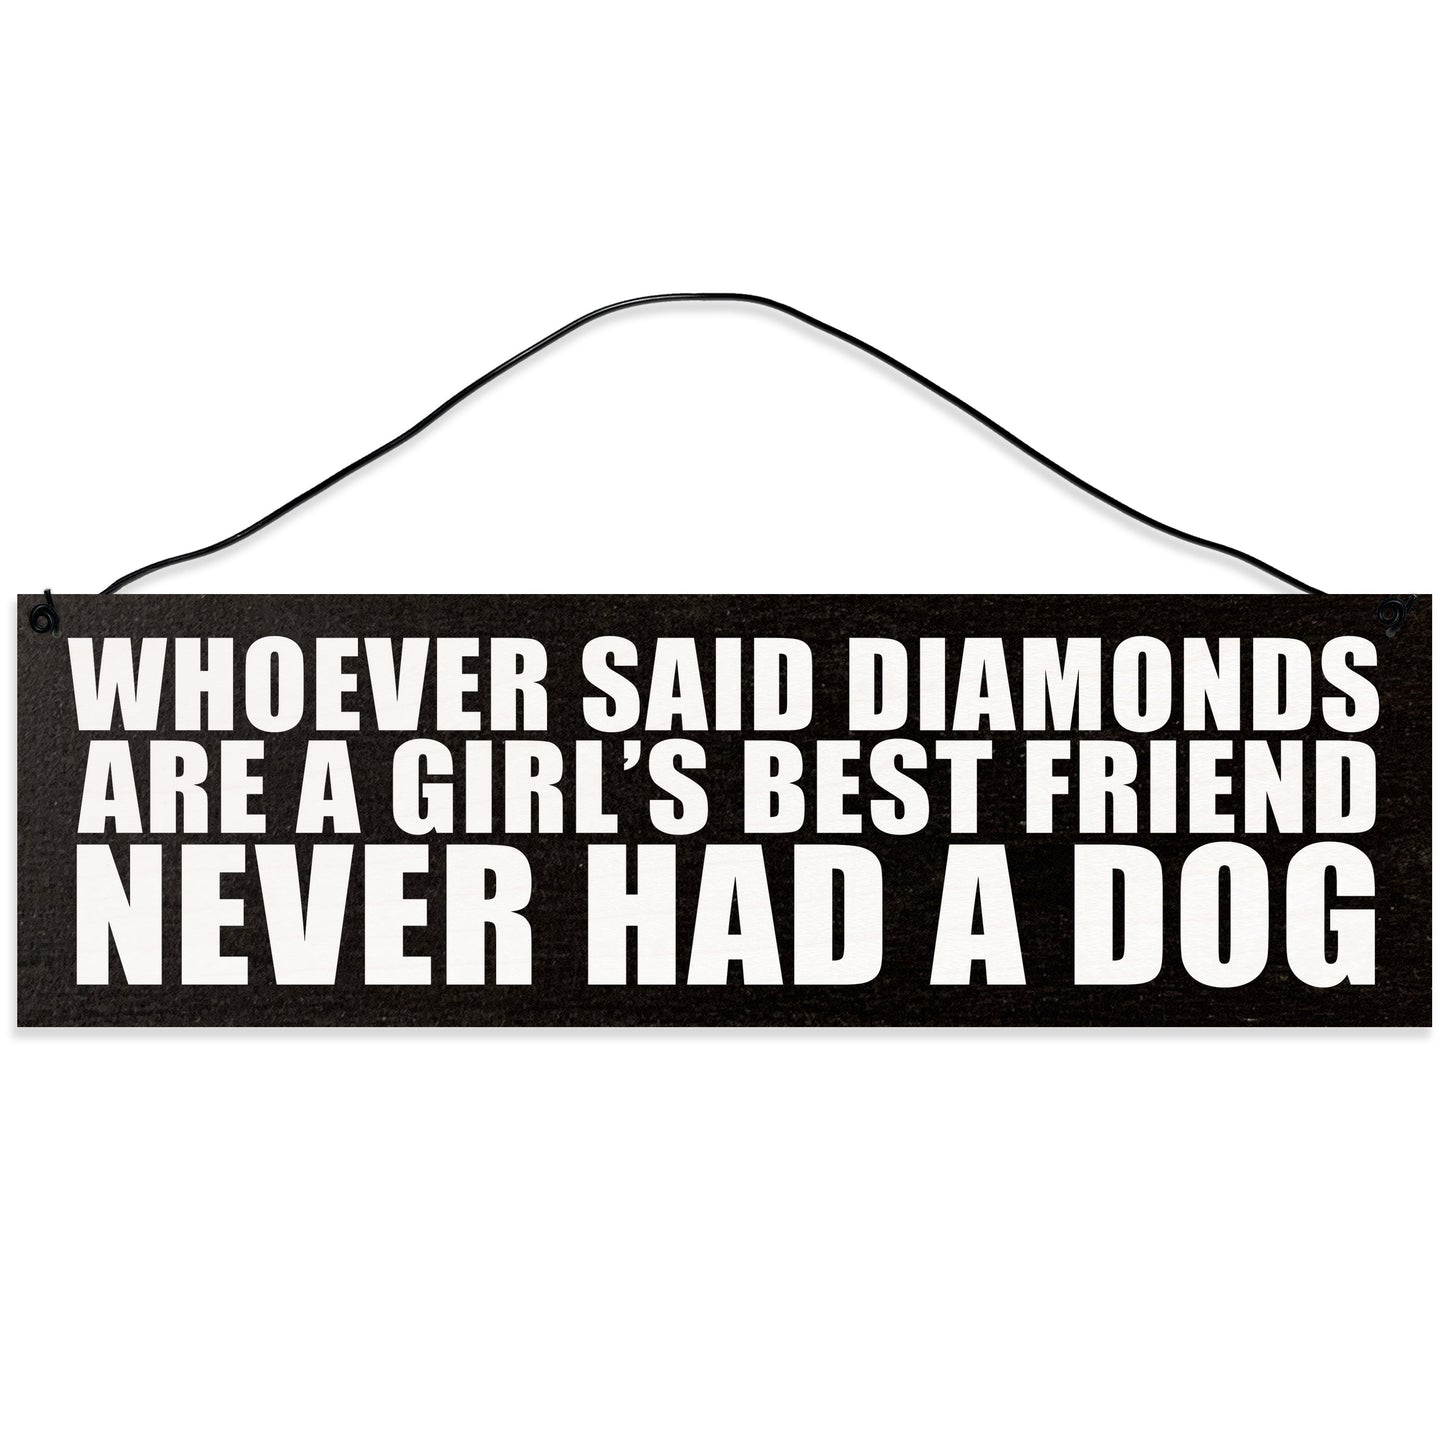 Sawyer's Mill - Diamonds are a Girl's Best Friend, Never Had a Dog. Wood Sign for Home or Office. Measures 3x10 inches.